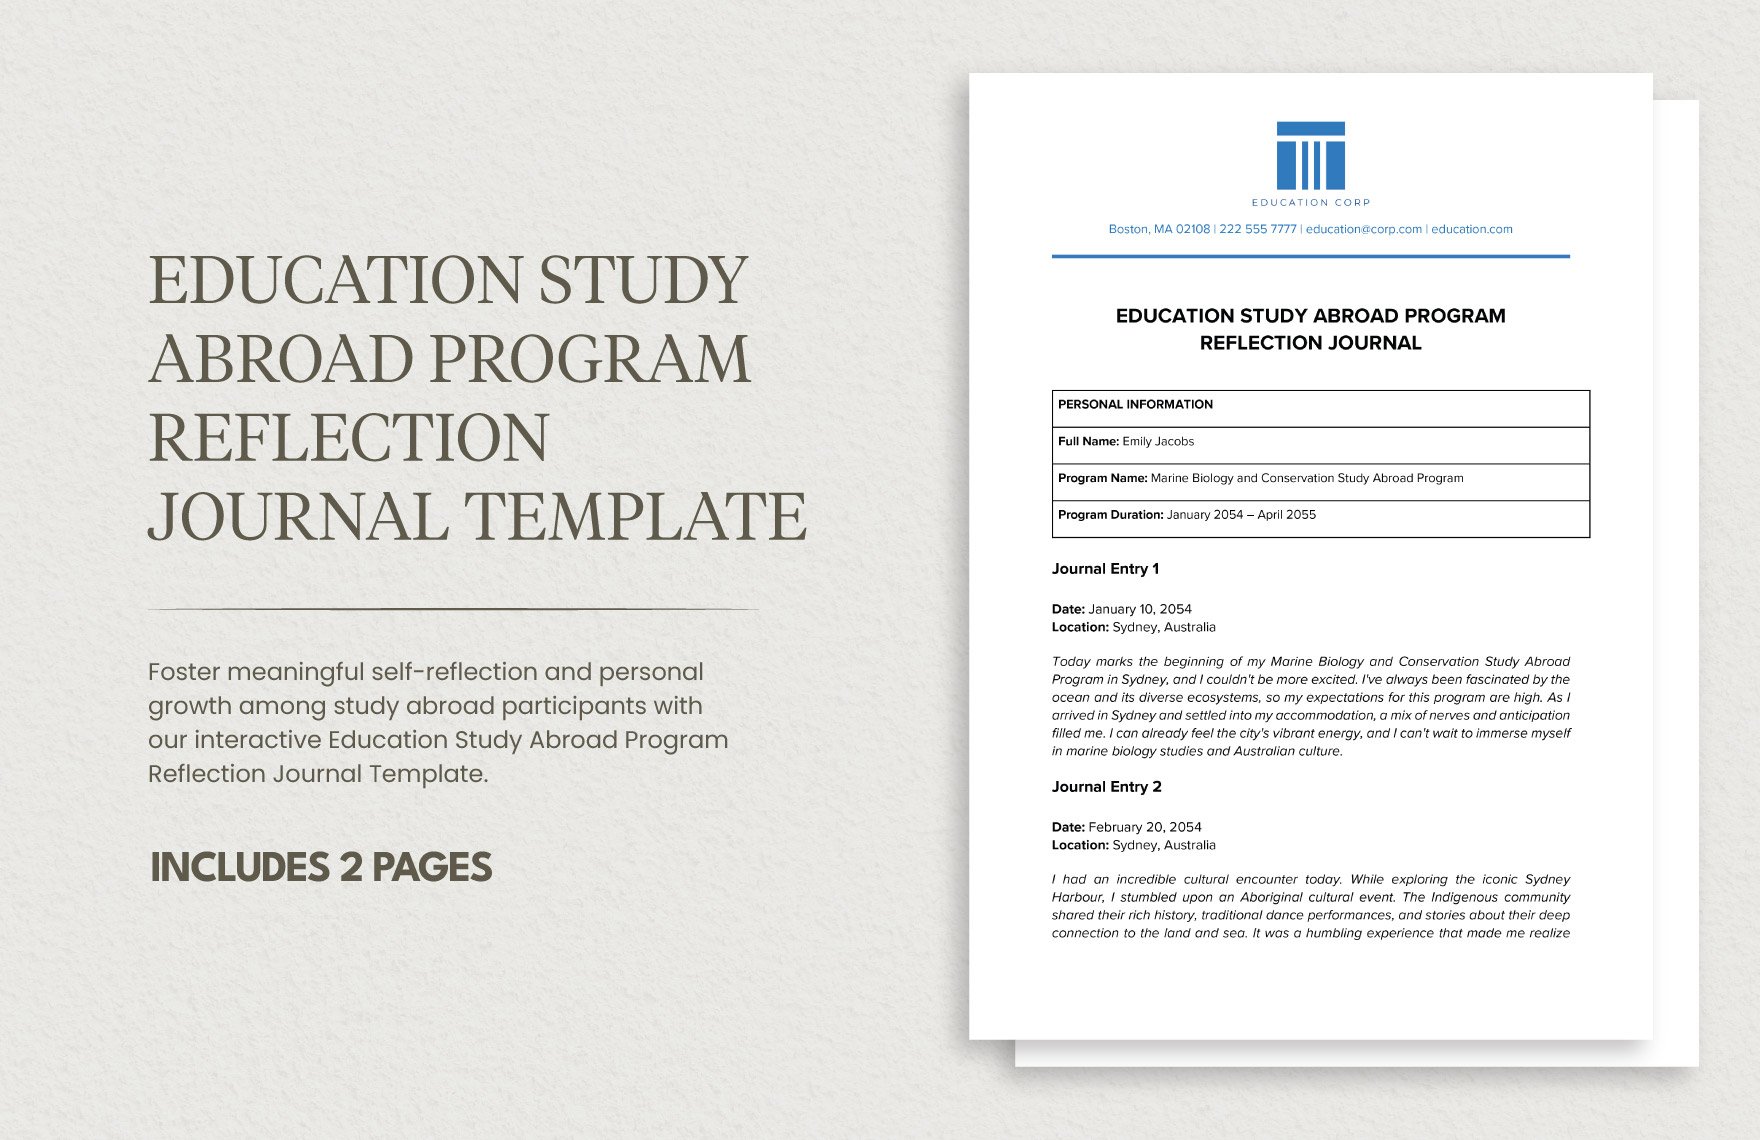 Education Study Abroad Program Reflection Journal Template in Word, Google Docs, PDF